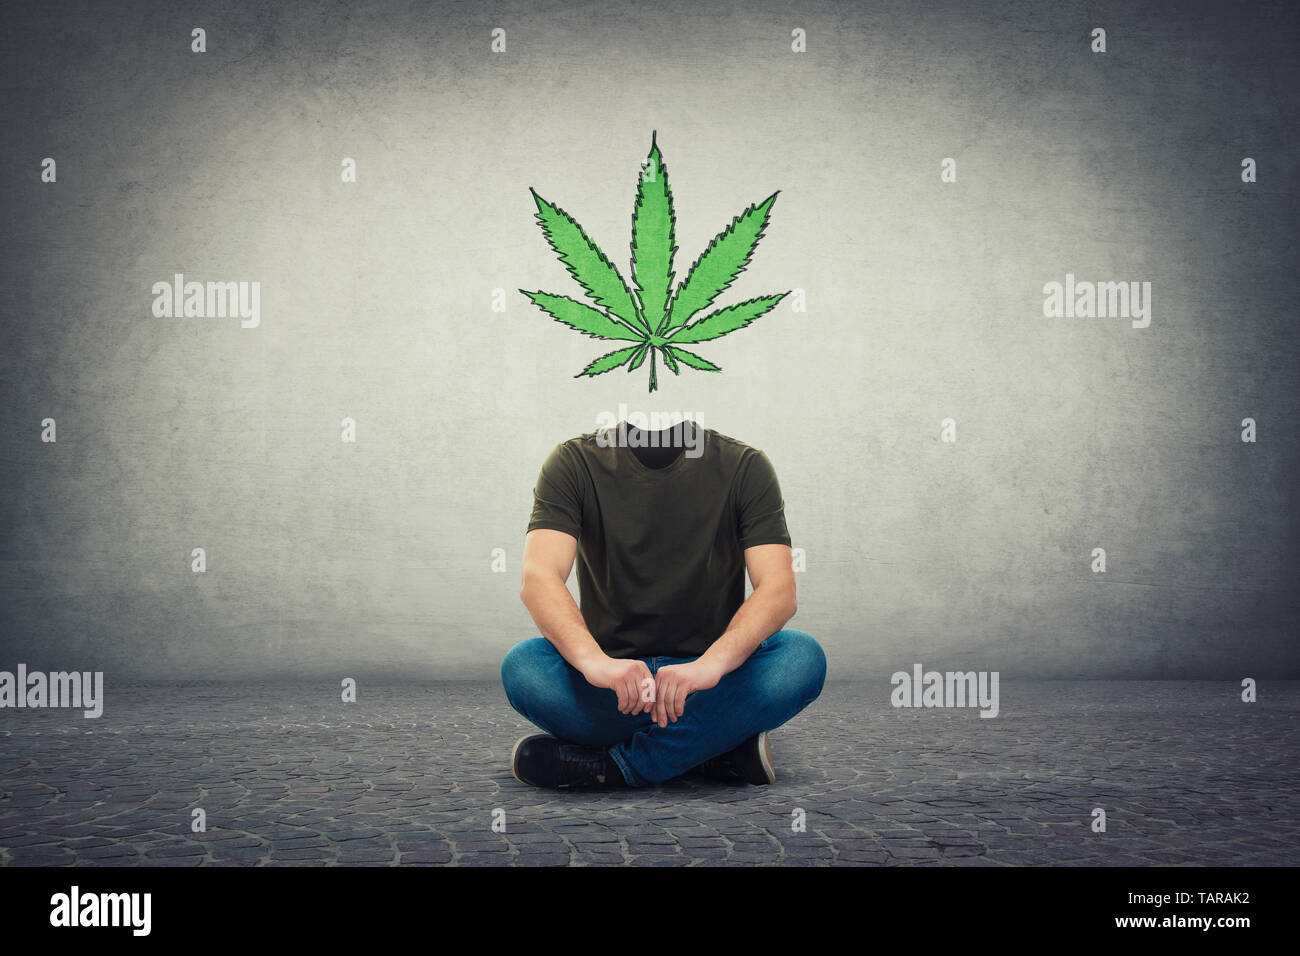 Surreal headless guy, invisible face seated on the floor with marijuana leaf symbol instead of head, as brain cure. Cannabis legalization as medical d Stock Photo